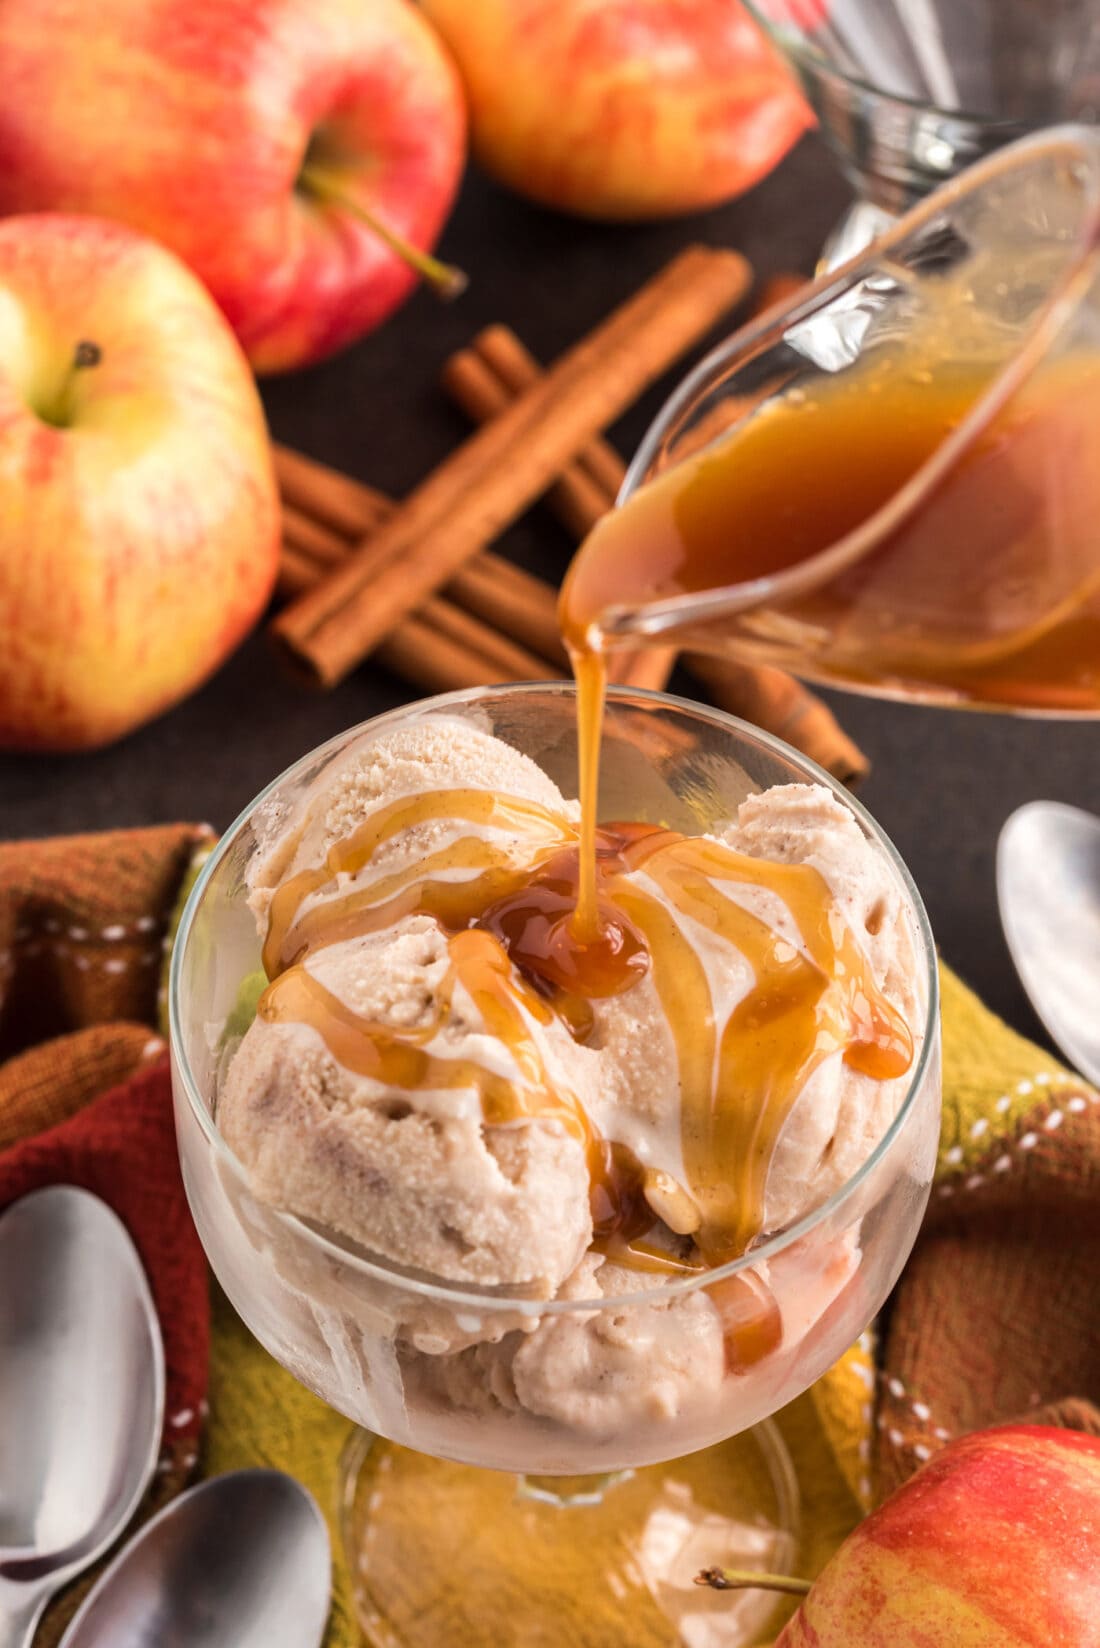 Caramel being drizzled over scoops of Apple Cider Ice Cream